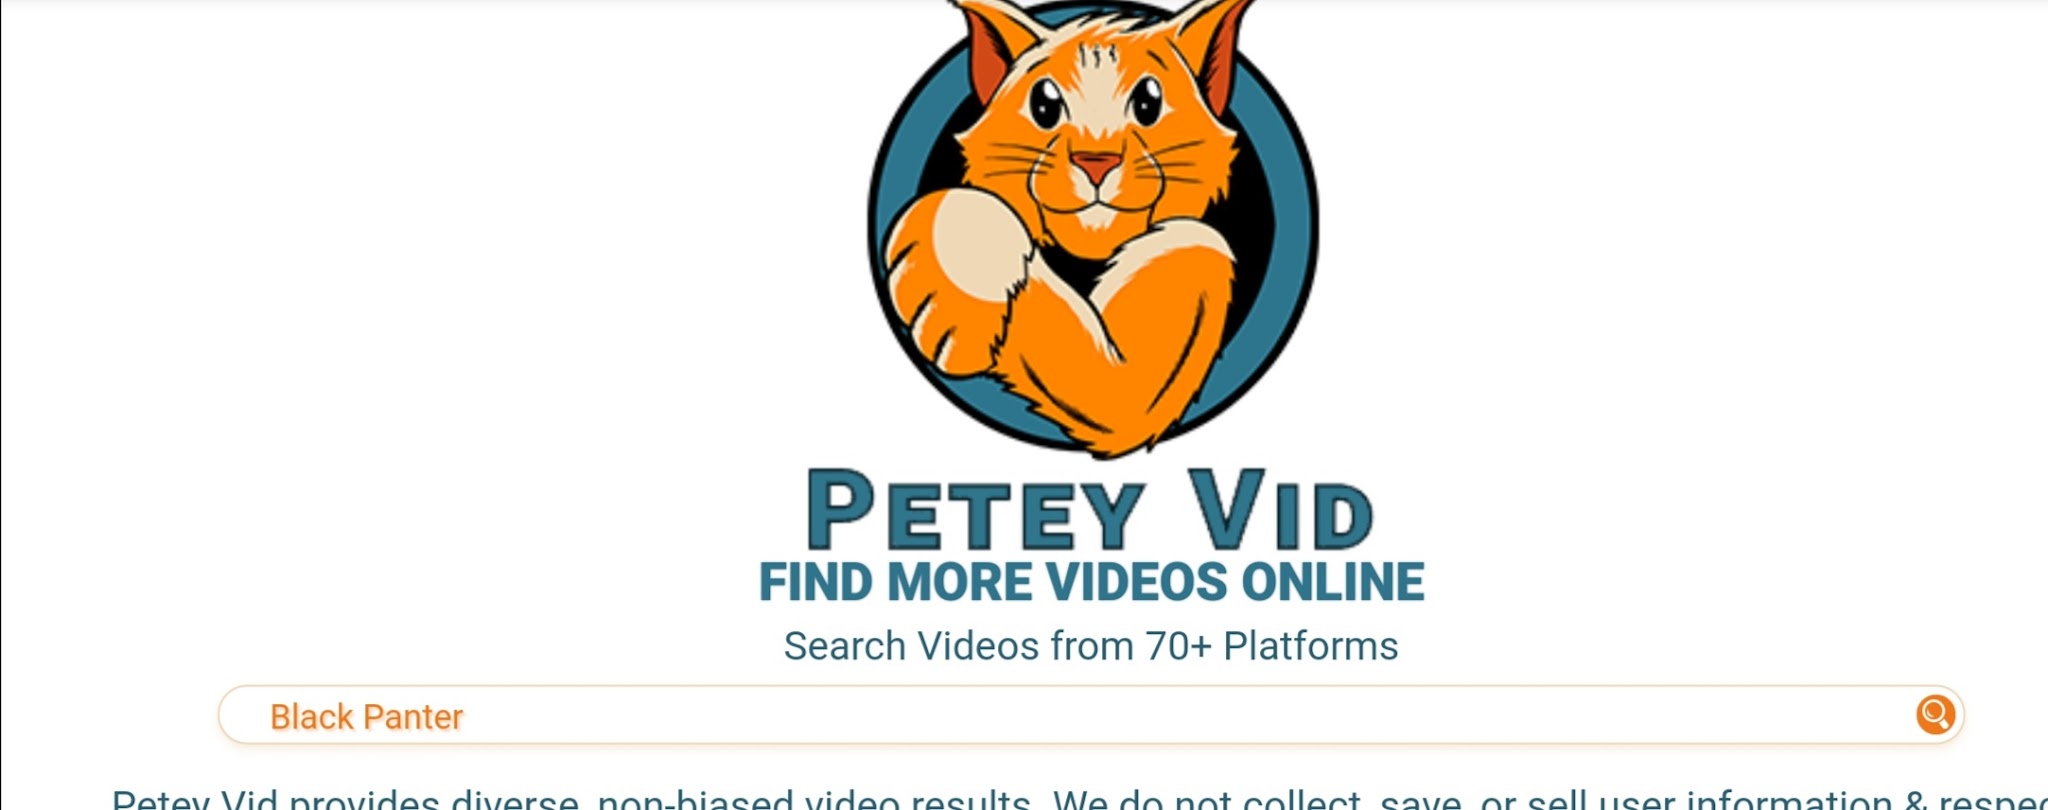 PeteyVid movies search